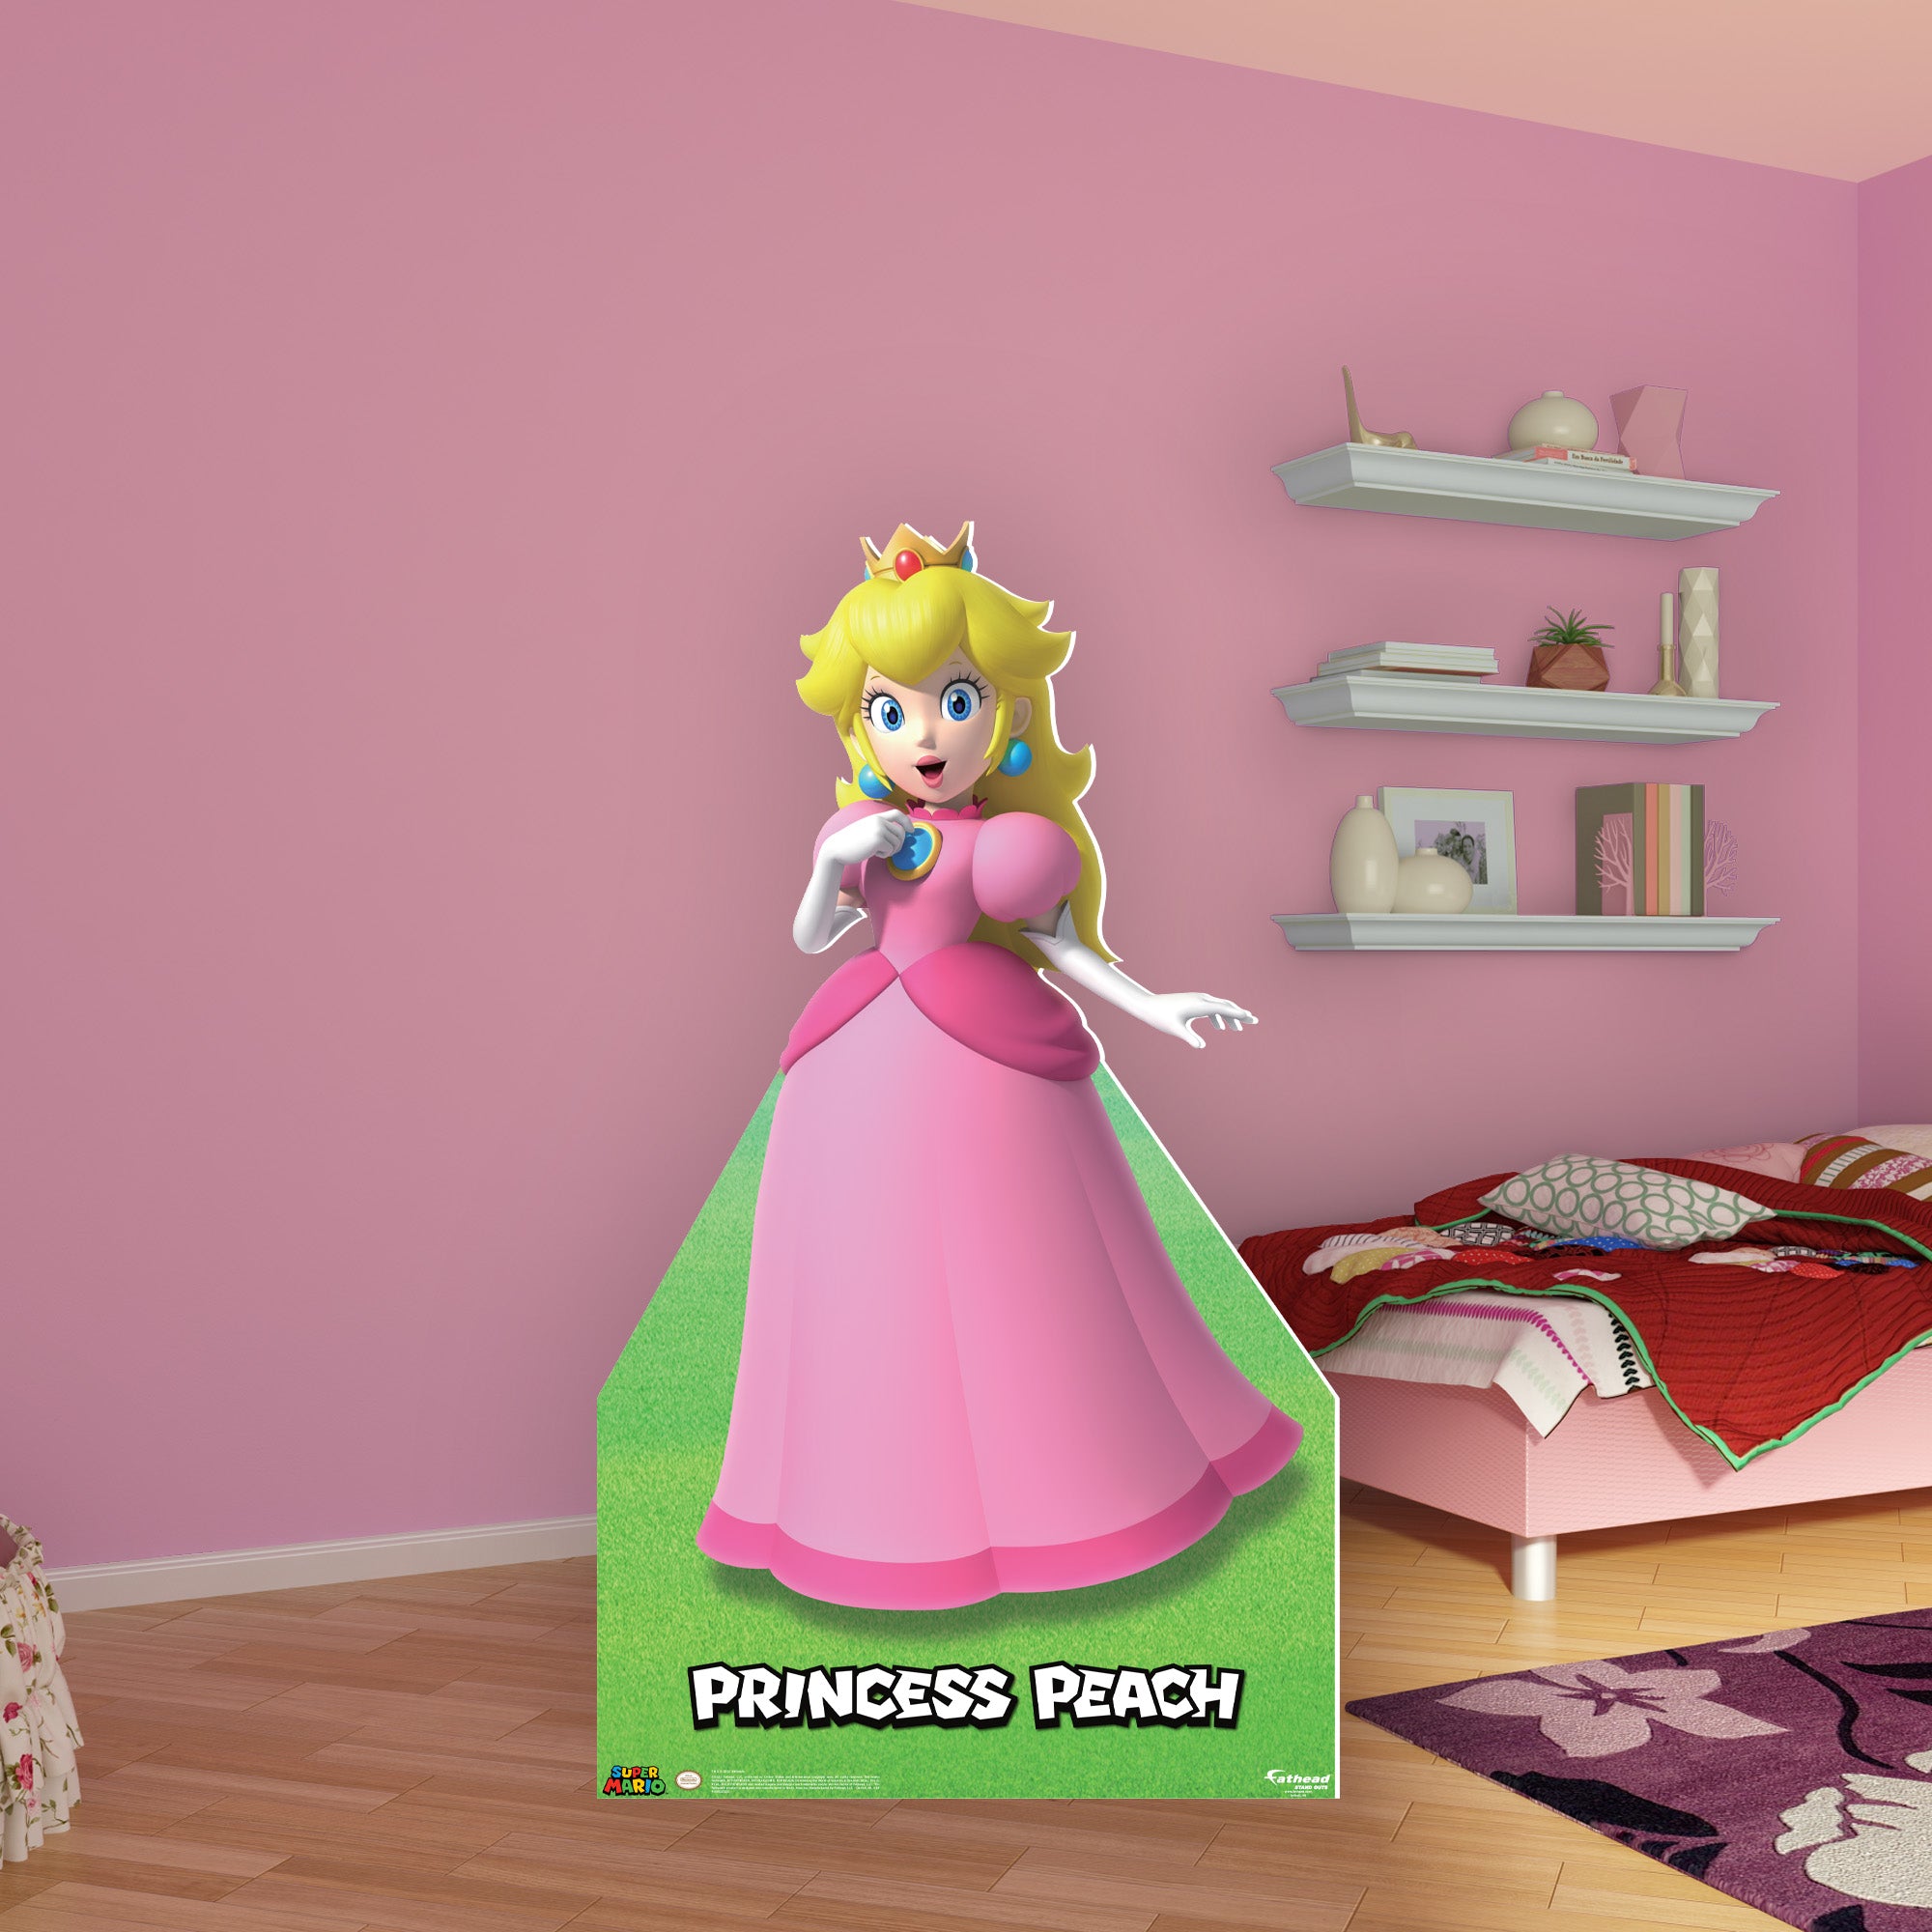 mario and princess peach doing it in the bed